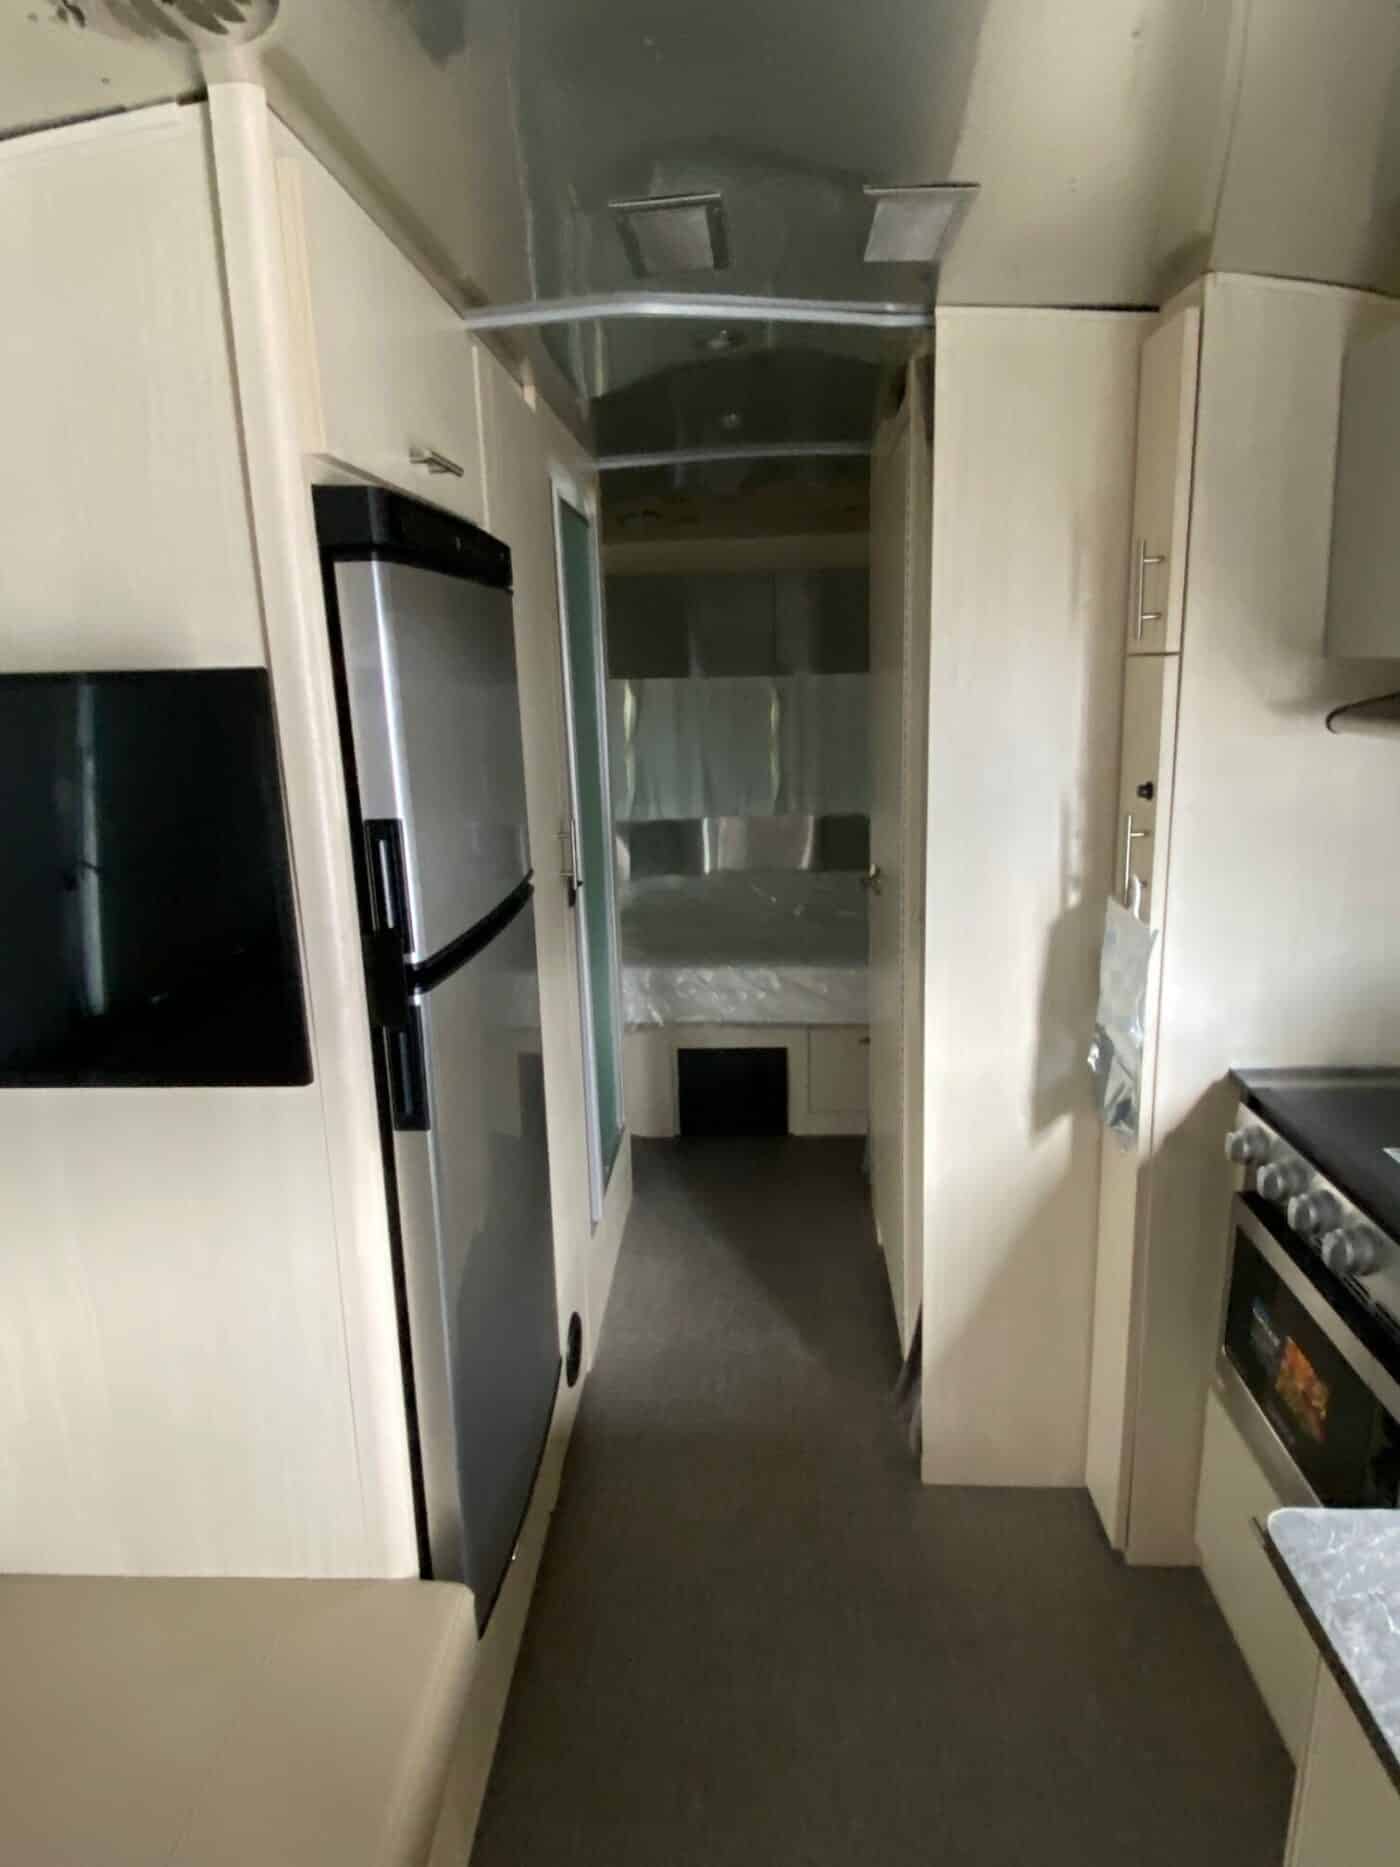 2022 25FT Flying Cloud For Sale In Waxahachie, Texas - Airstream ...